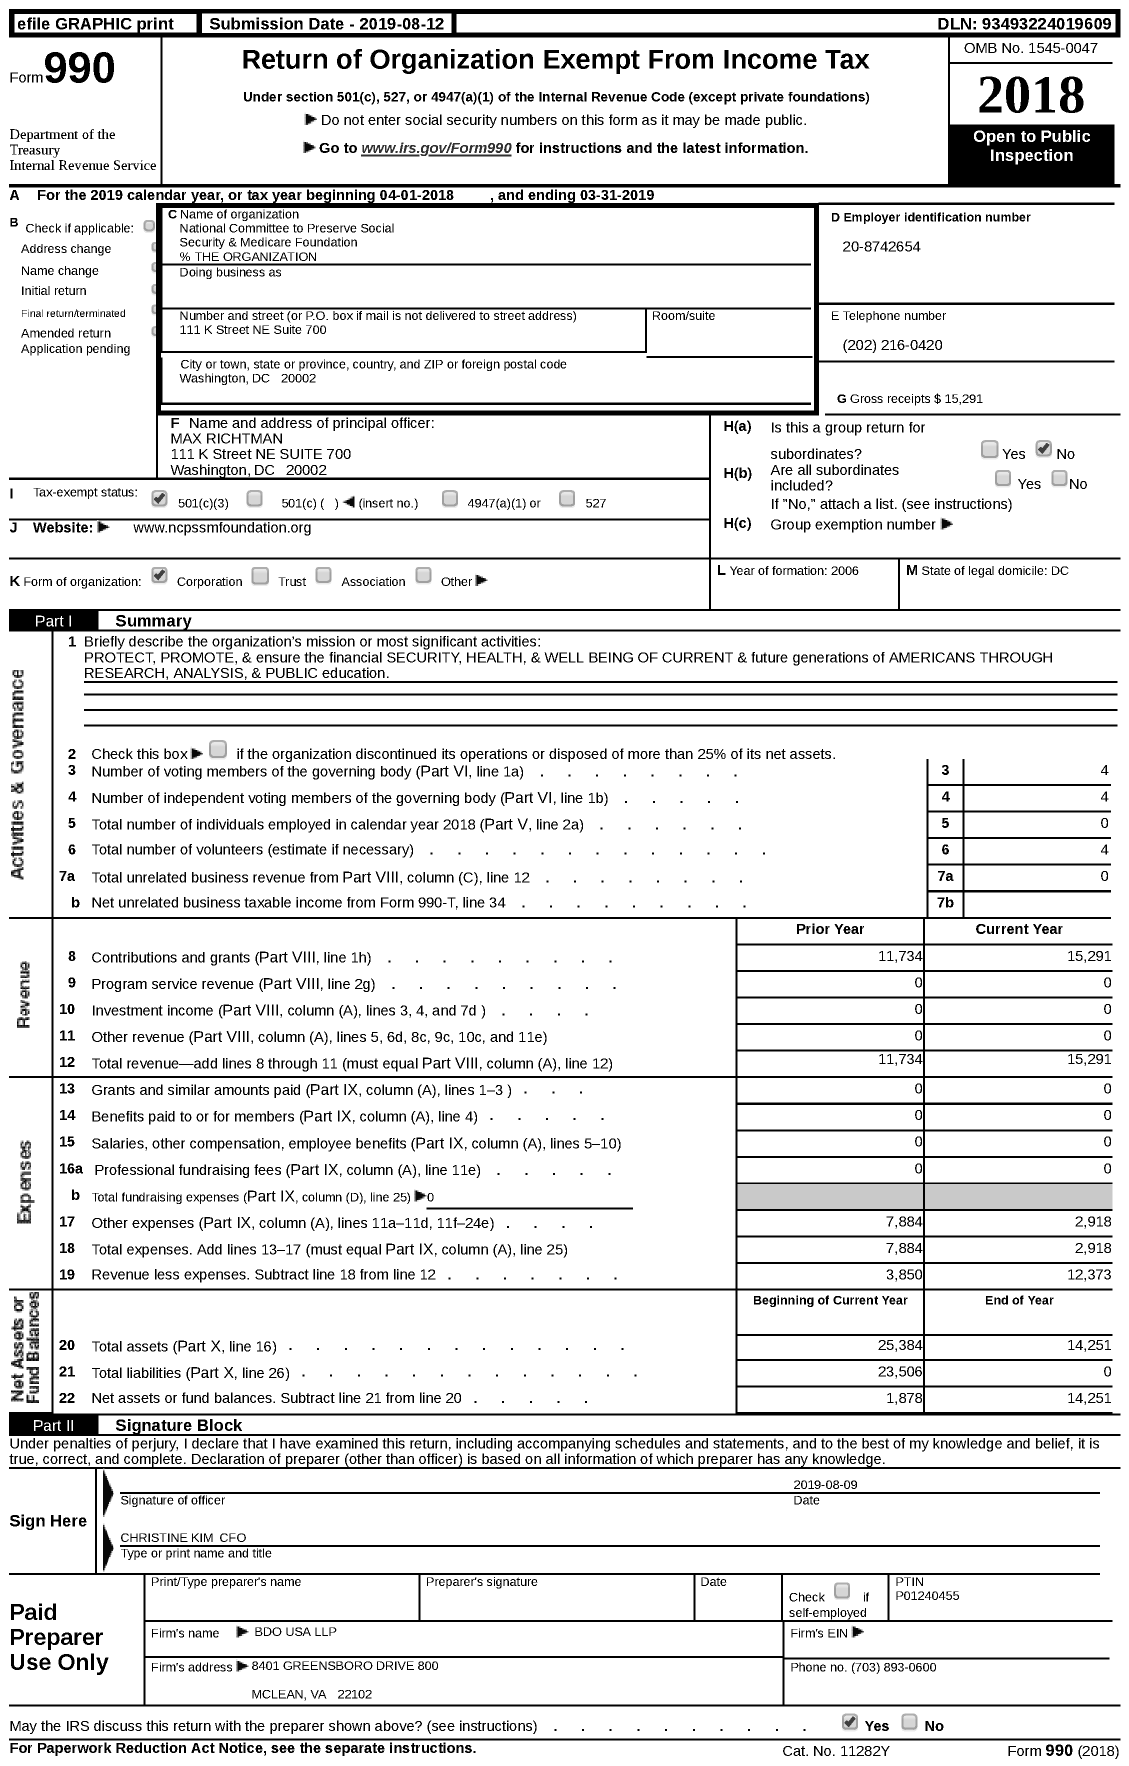 Image of first page of 2018 Form 990 for National Committee to Preserve Social Security & Medicare Foundation